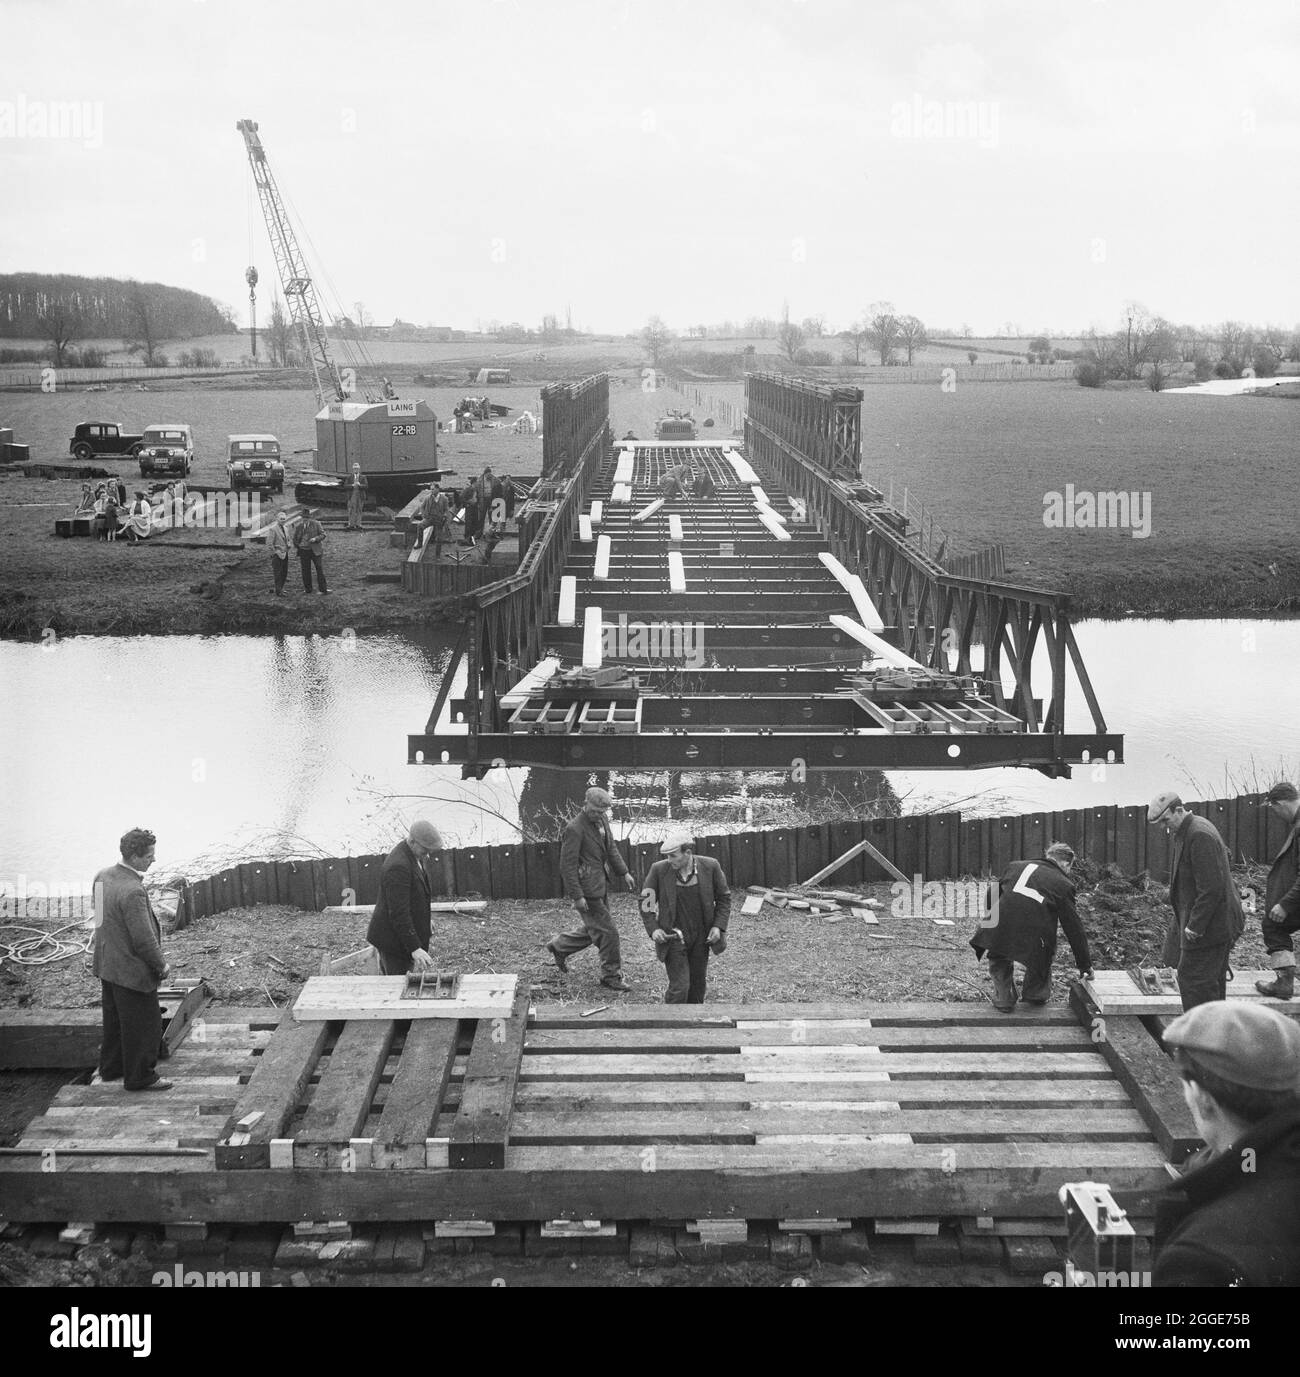 A Bailey bridge being erected across the main channel of the River Great Ouse near Newport Pagnell, during the construction of the London to Yorkshire Motorway (the M1). The caption beneath the corresponding album print states 'The Bailey Bridge being launched is a Double-double, effective span 100'0'', over the Main Ouse channel. 220,000 c/y's of excavated material will be transported over this bridge by Euclids, saving a six mile haul by road. In addition it also makes it possible to travel the full length of B3 Section on the line of the motorway'. Stock Photo